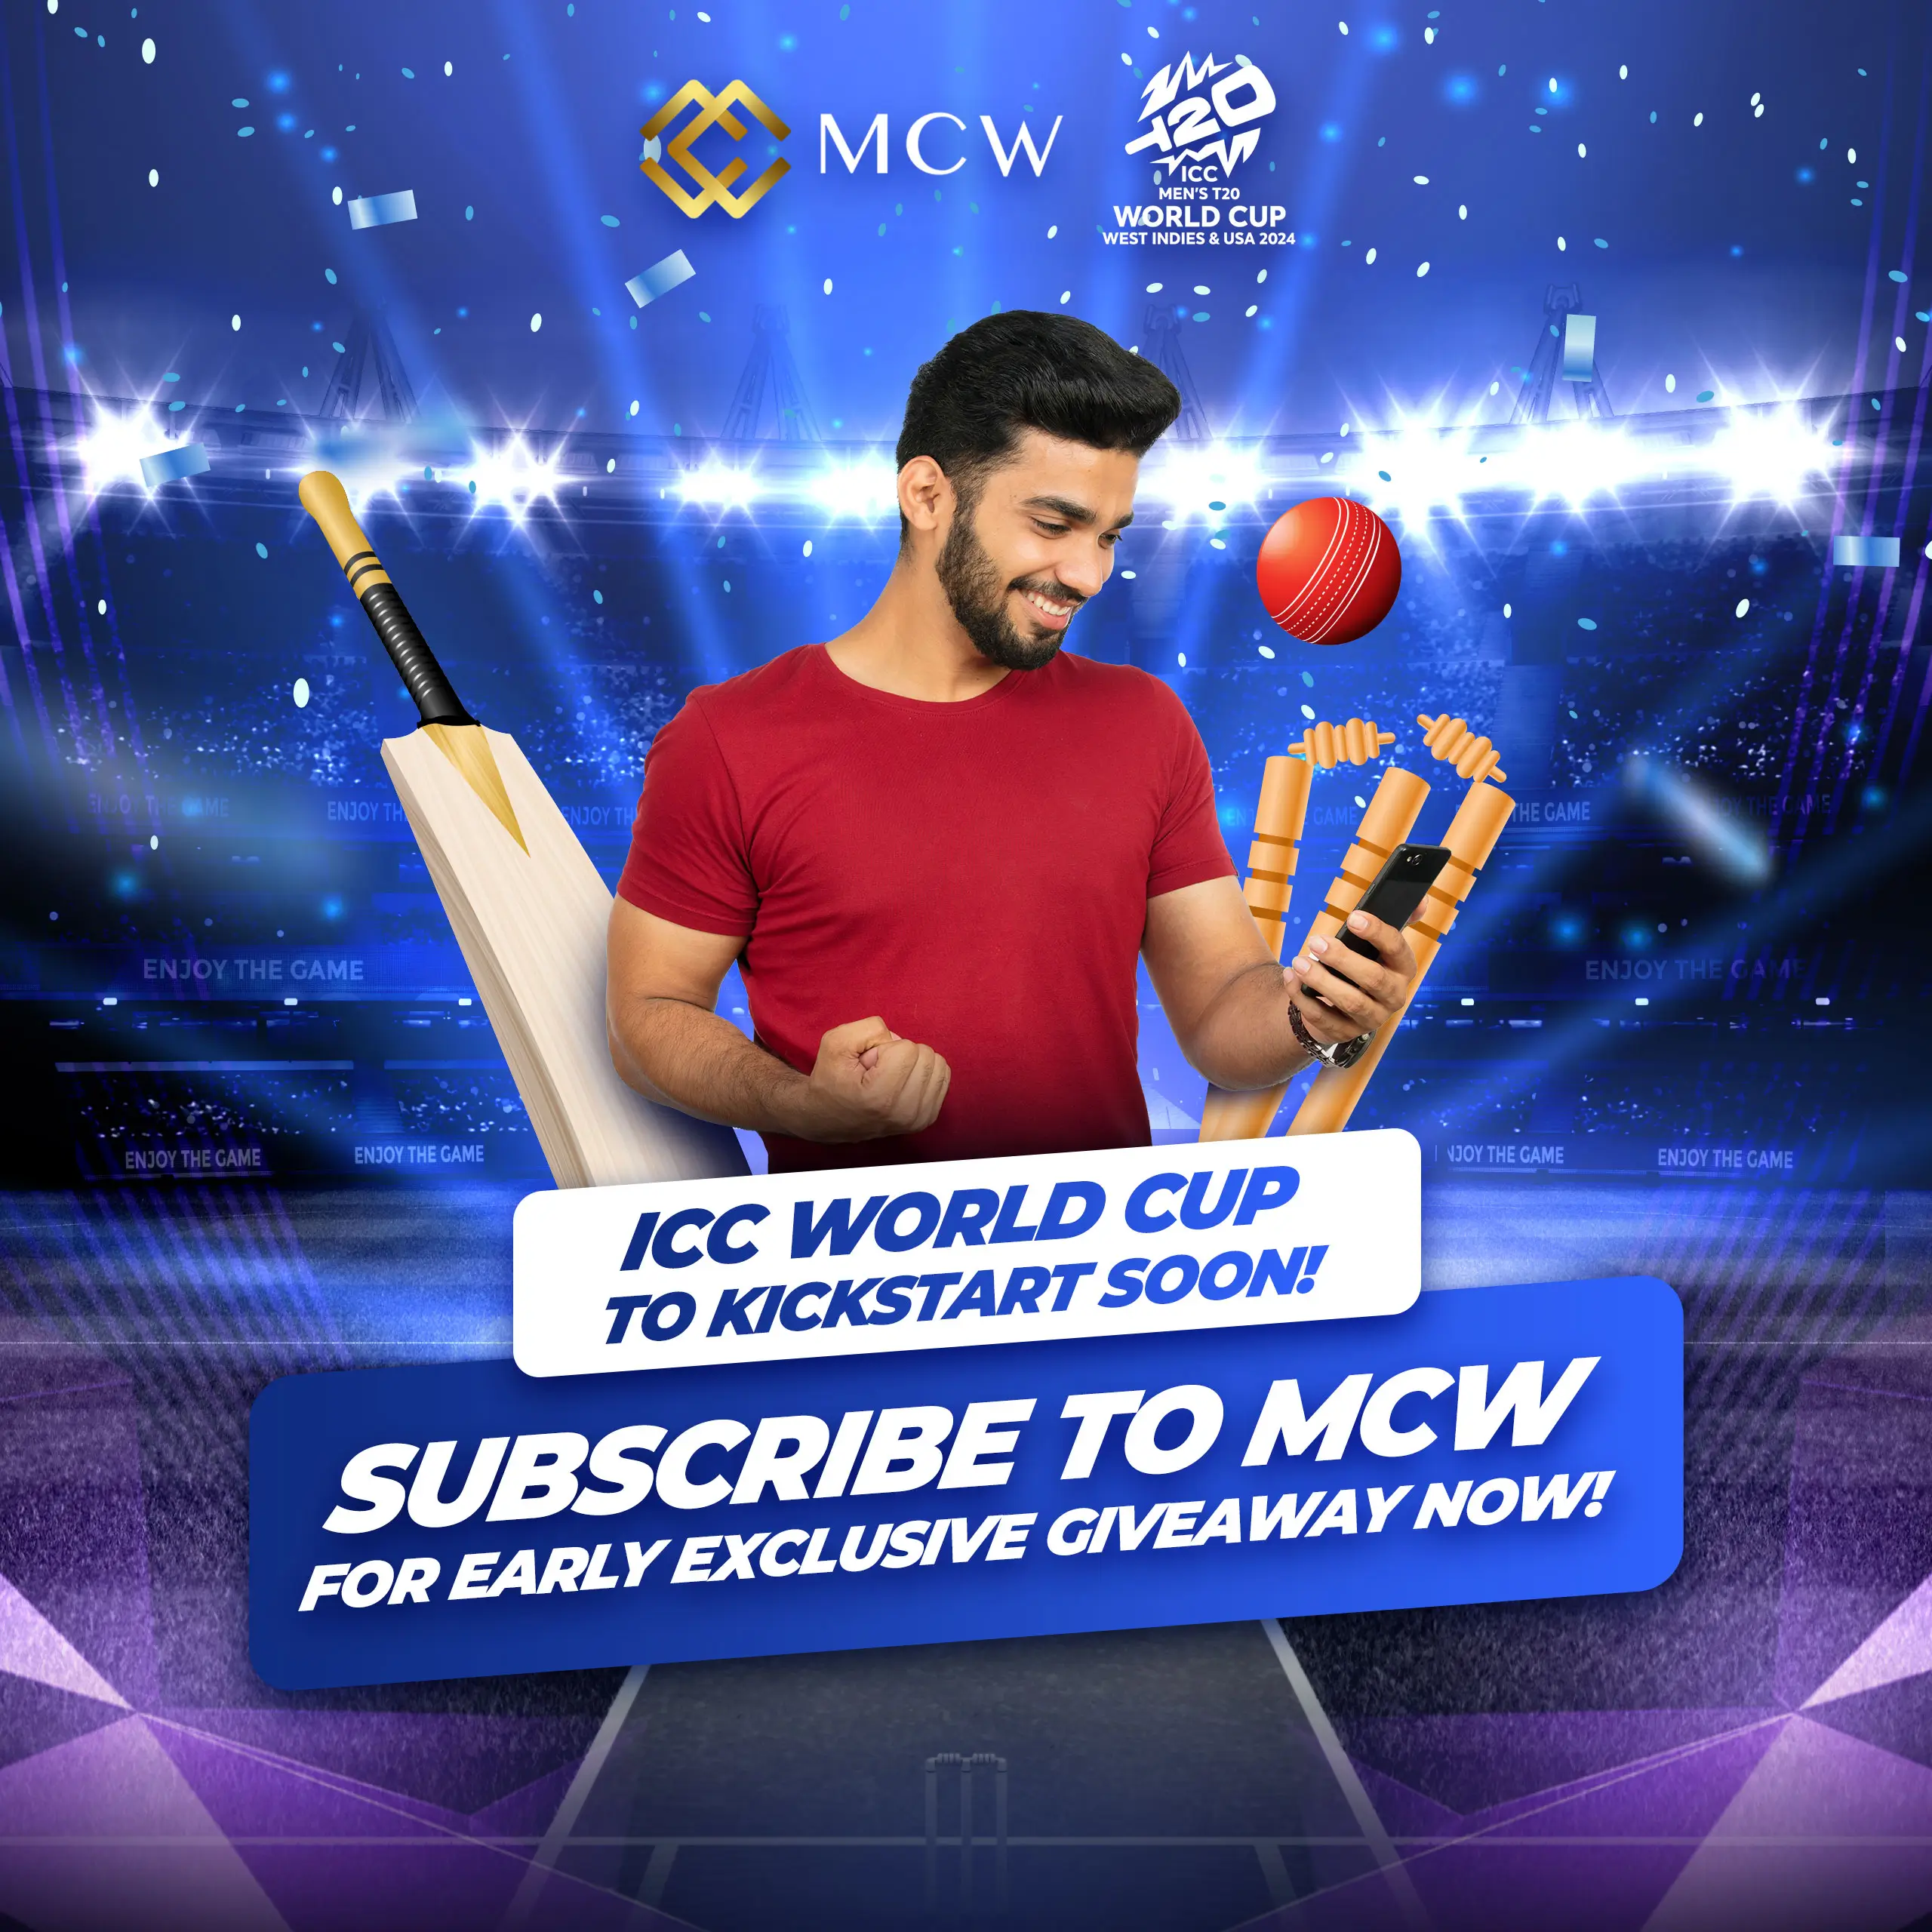 ICC World Cup to kickstart soon! Subscribe to MCW for early exclusive giveaway now!